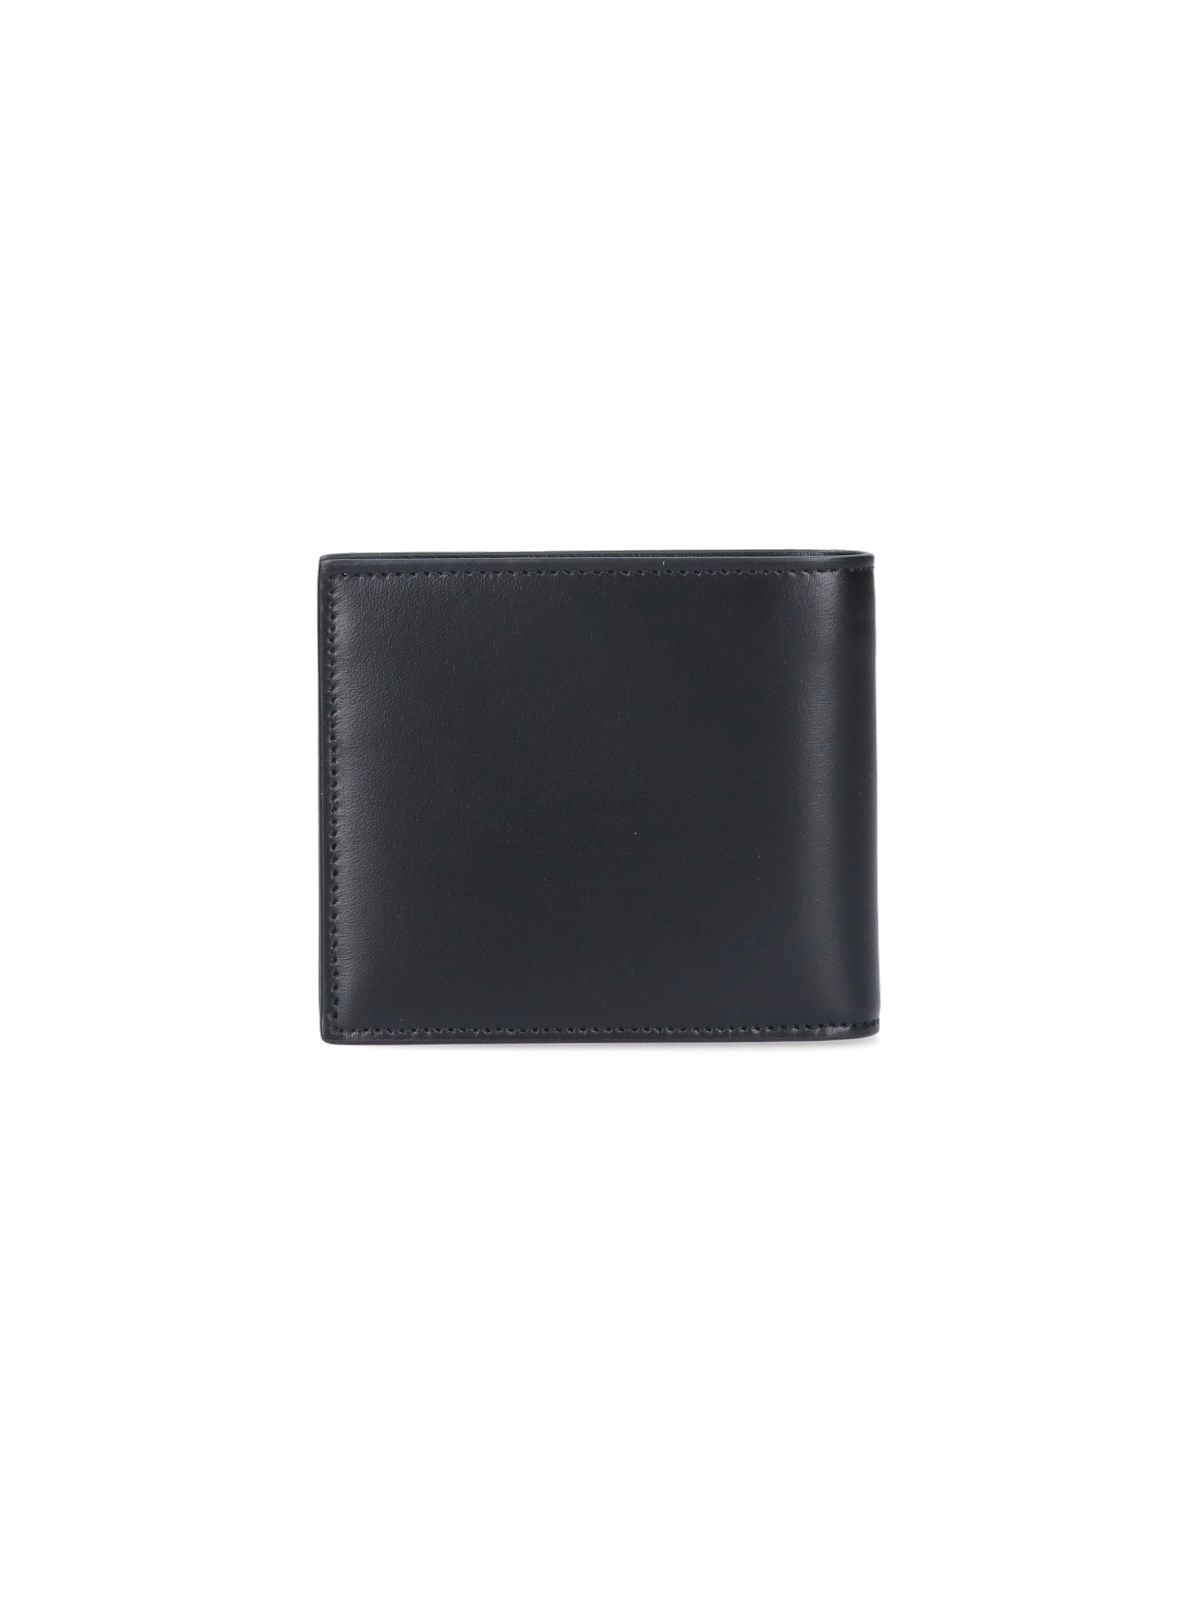 'EAST WEST' WALLET SMALL - 3